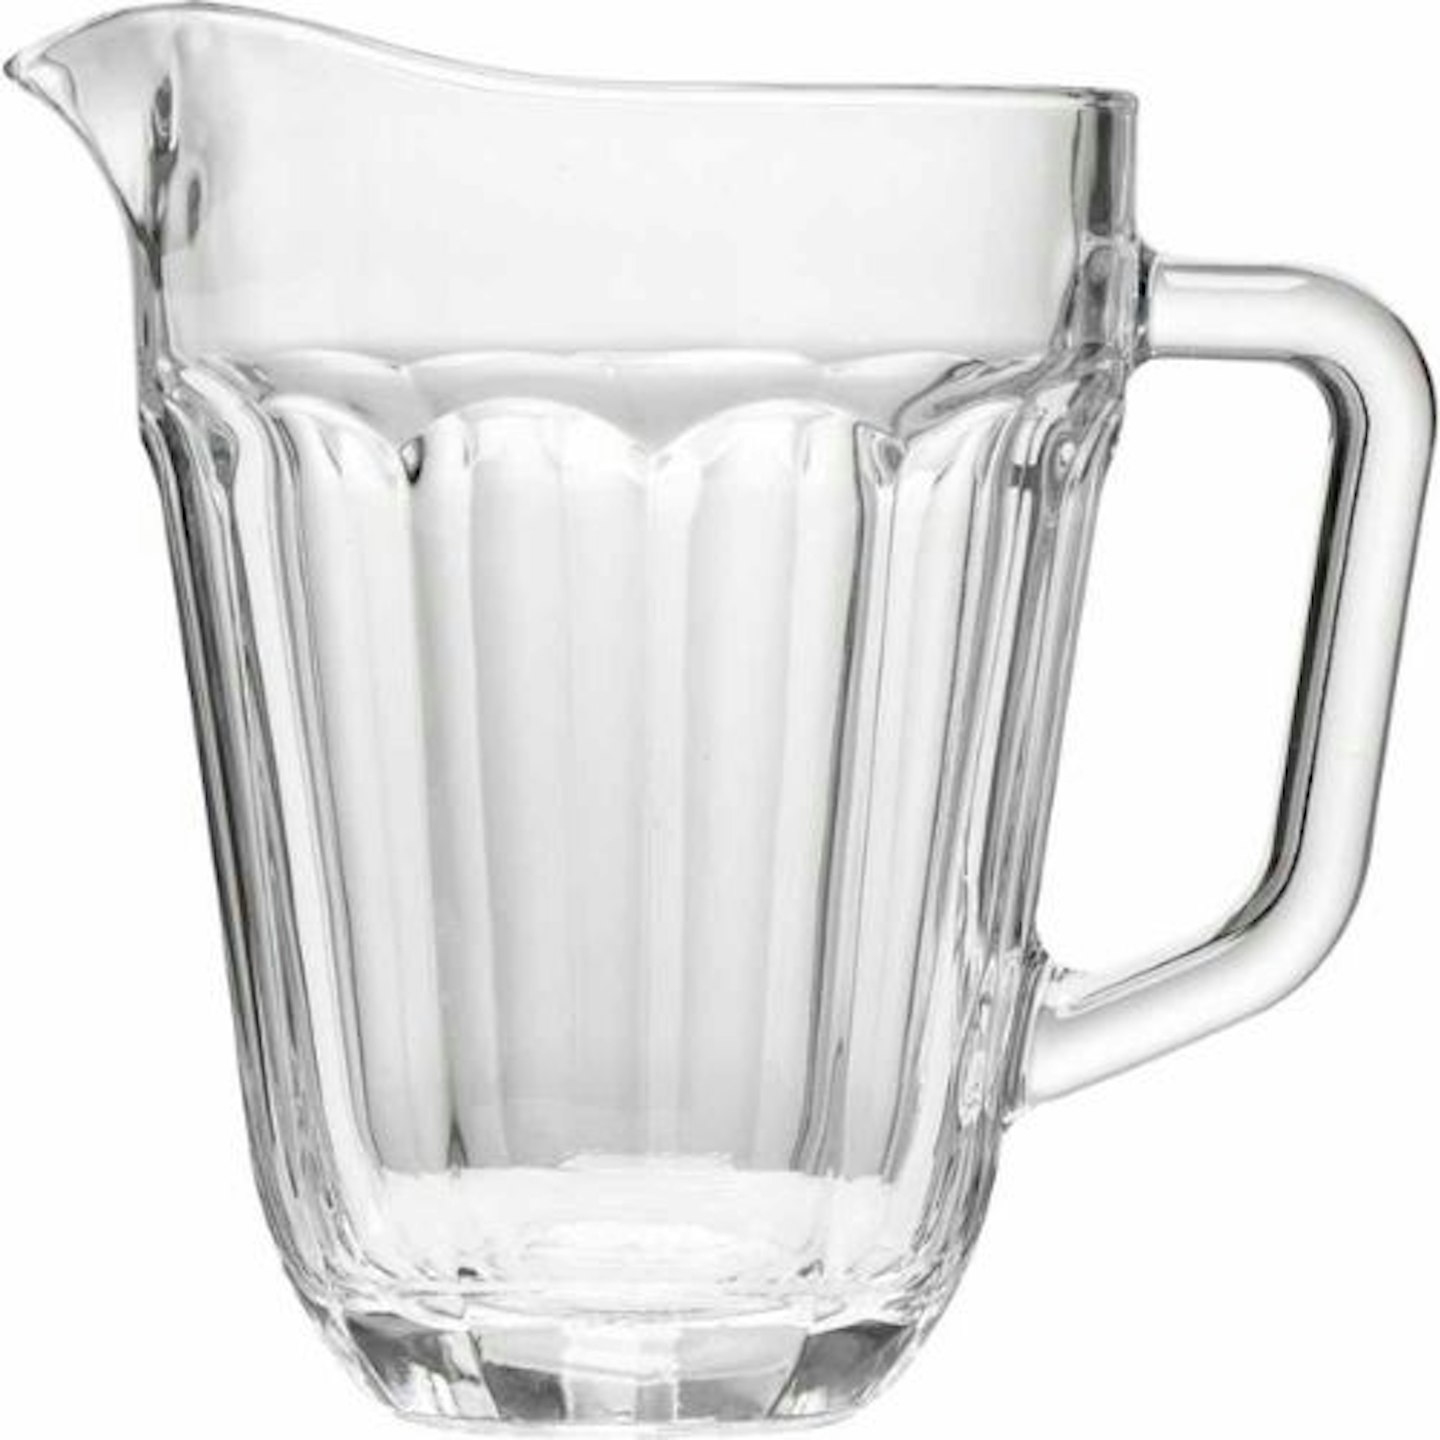 A glass pitcher from Wilko